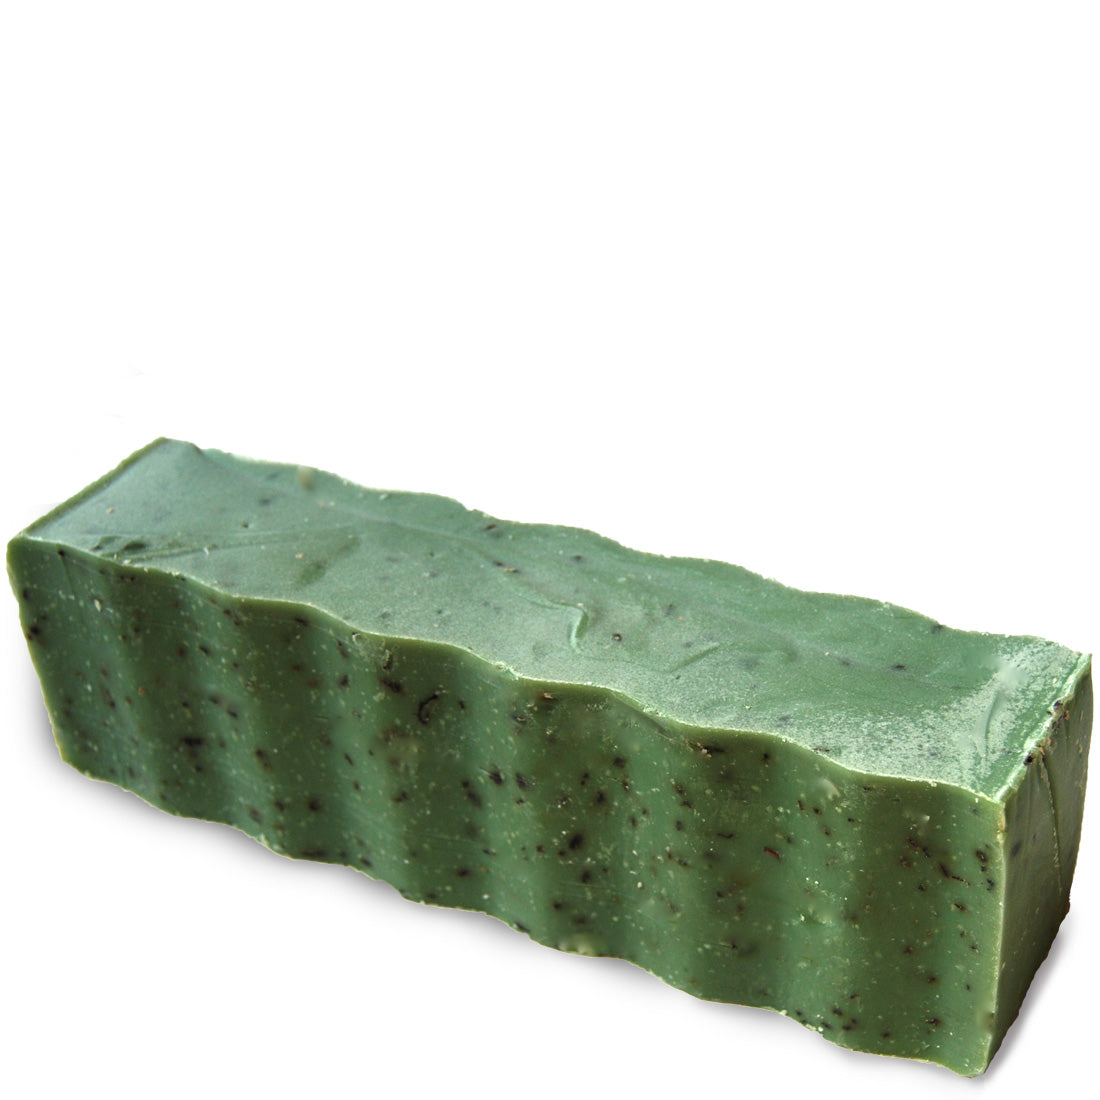 Speckled green colored wavy rectangular 45 ounce brick of rosemary and mint scented Zum Bar Soap